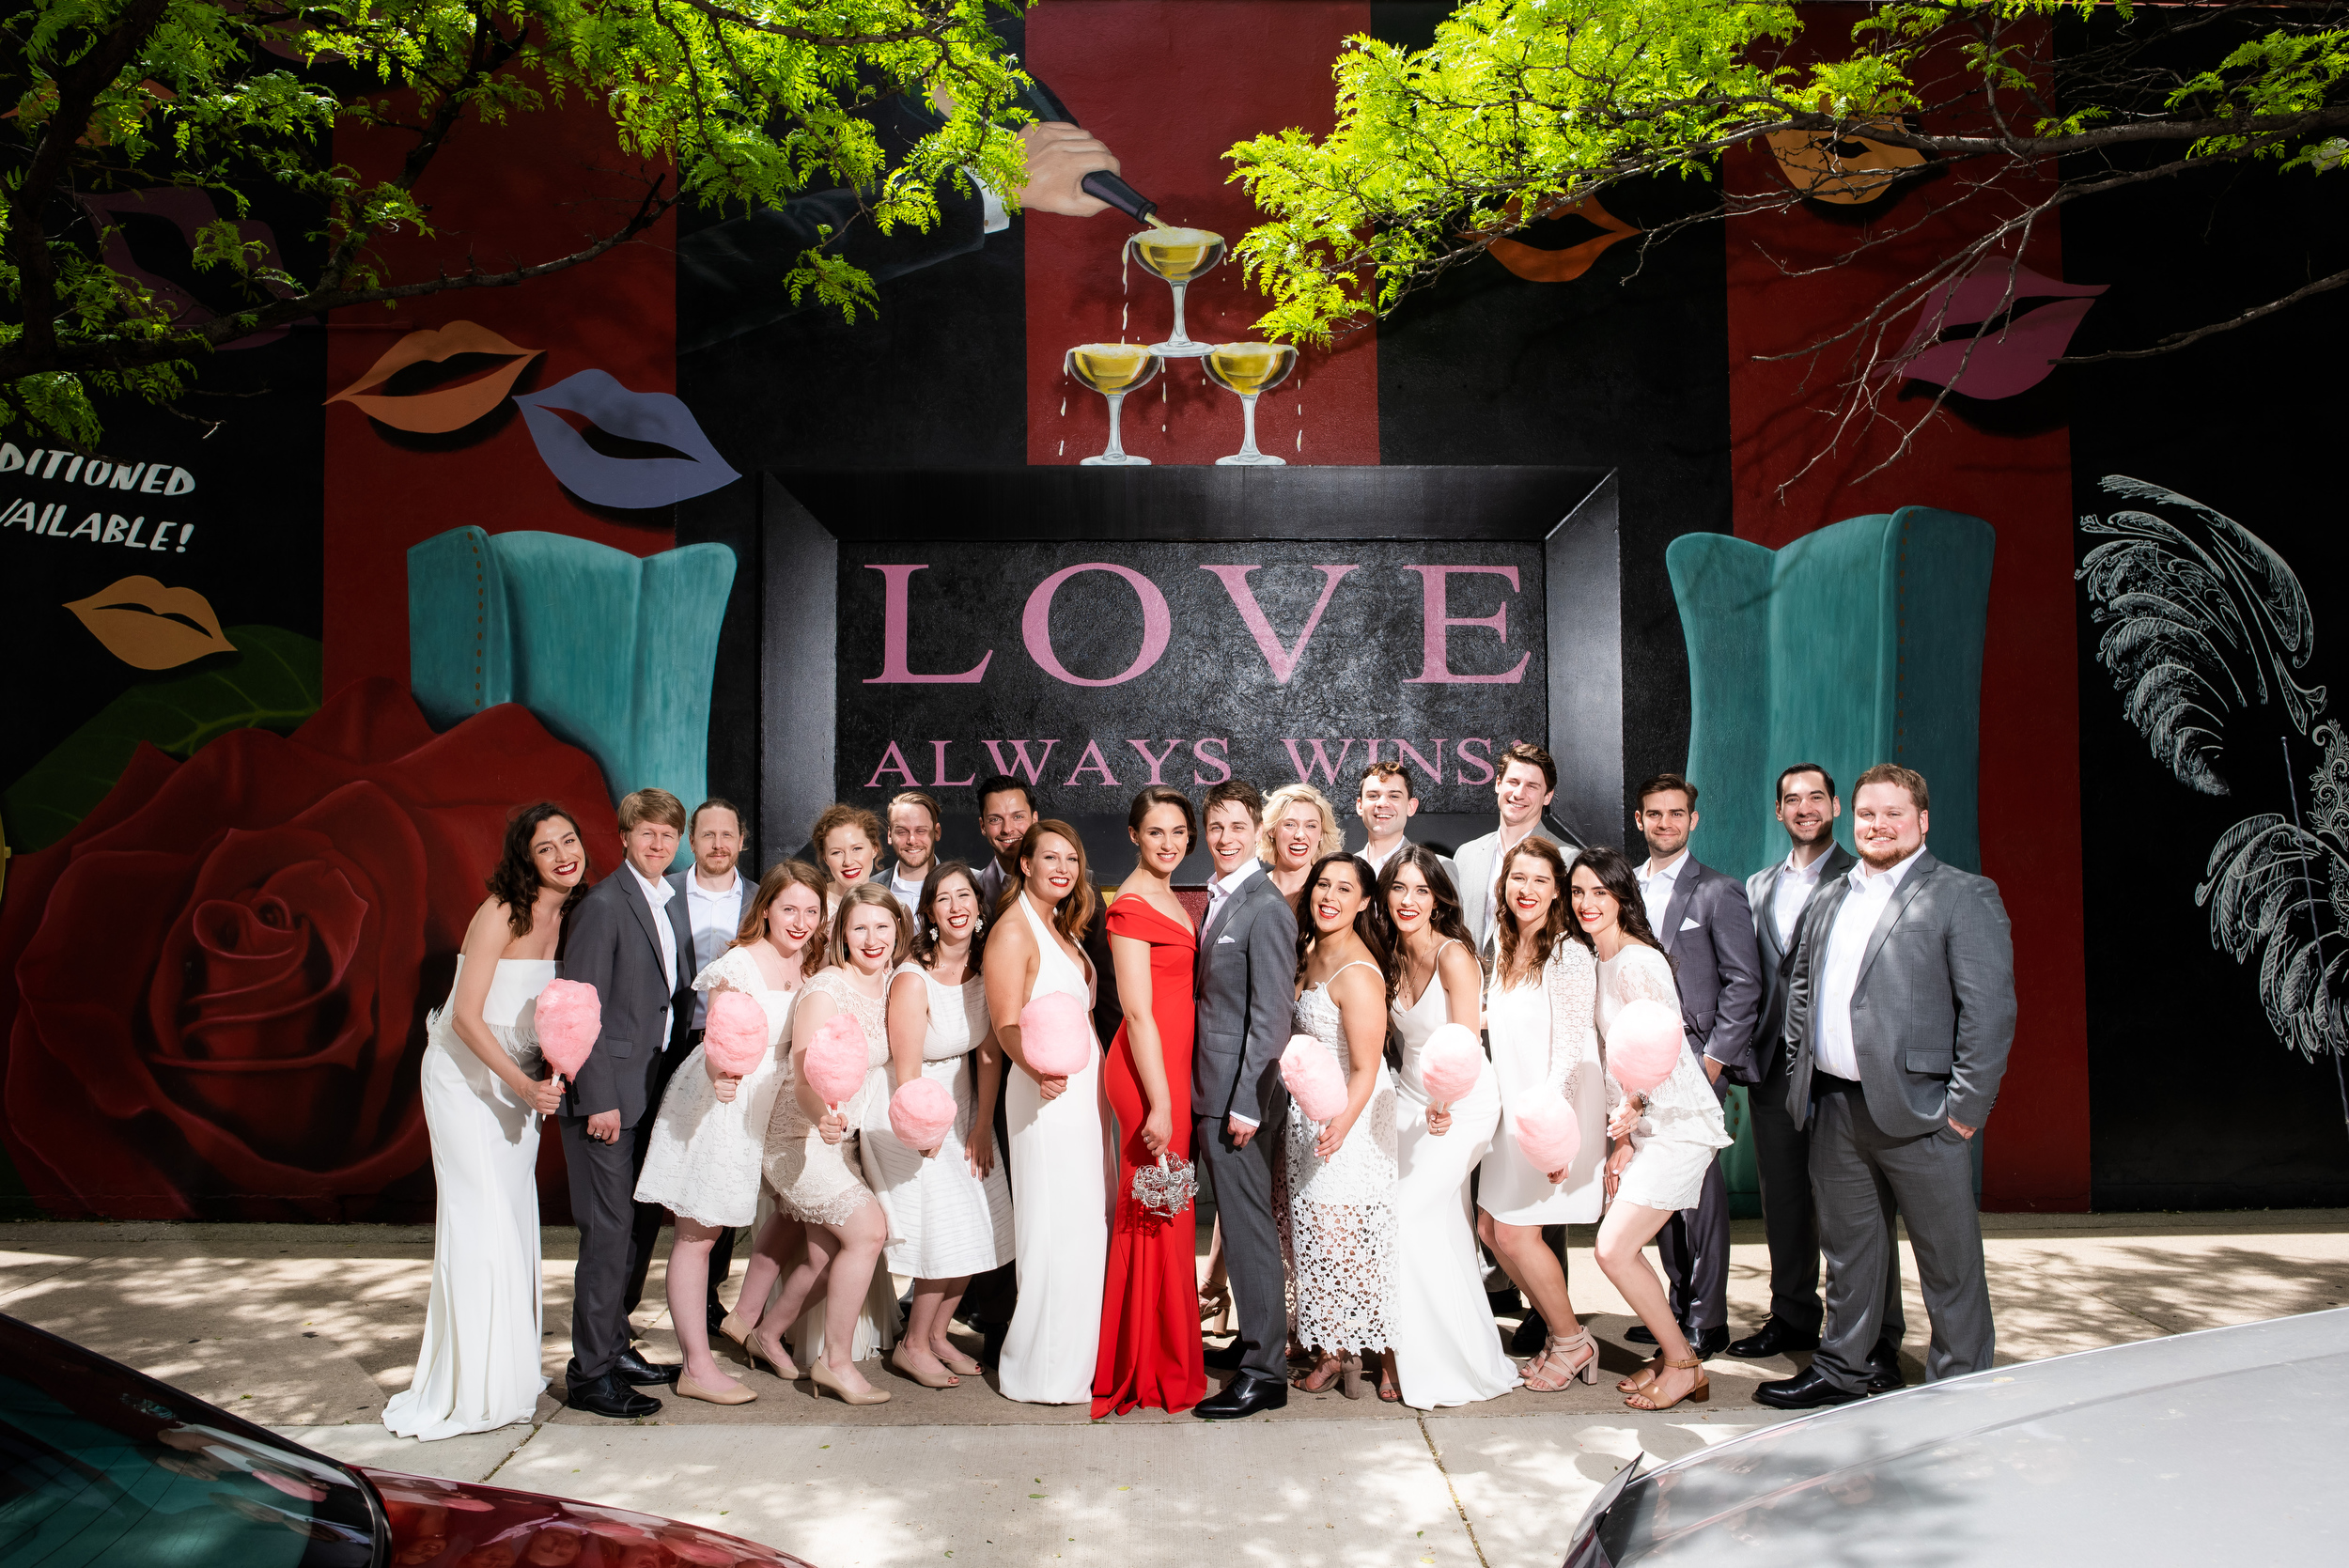 Outdoor wedding photos: Carnivale Chicago wedding captured by J Brown Photography